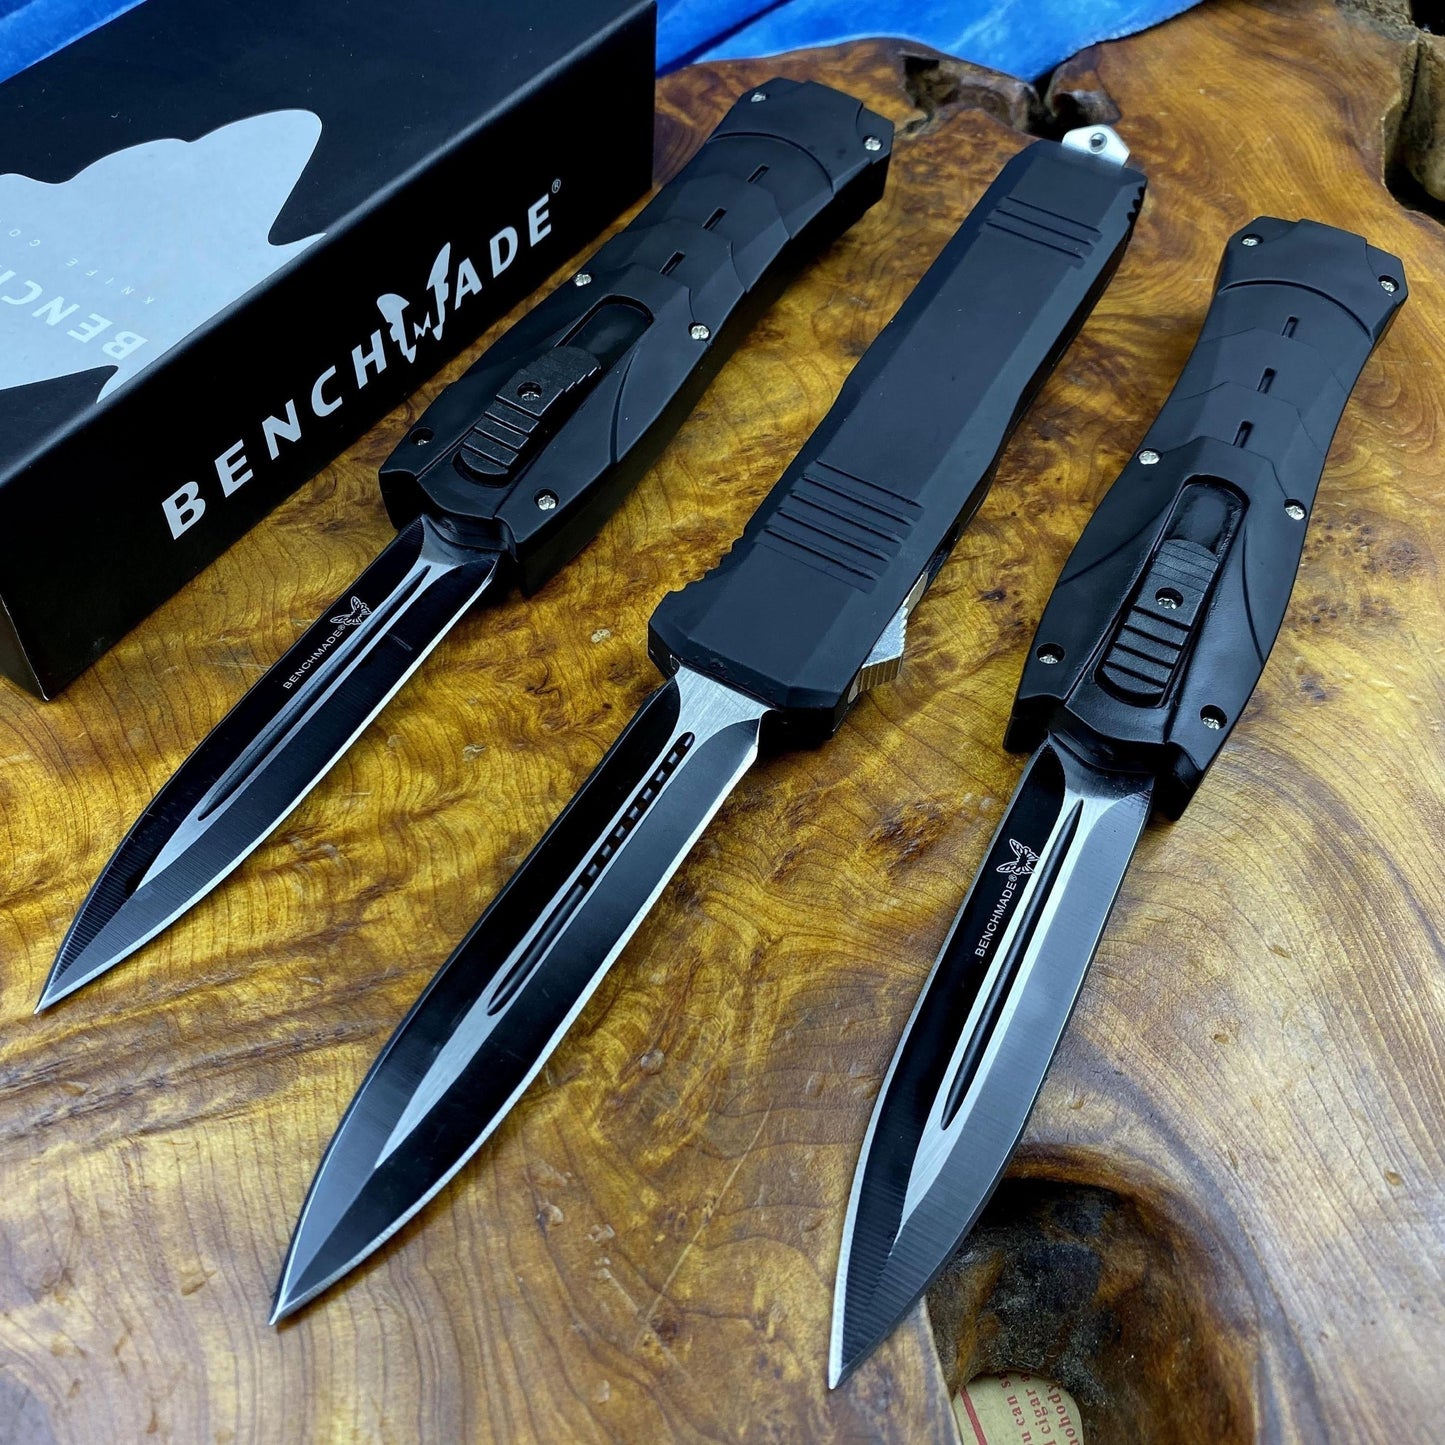 Benchmade C07 Tactical Knives AUTO EDC Spring Assist Knife Fixed 440 Blade Double Edge Survival Camping Hunting Cutting Fast Opening